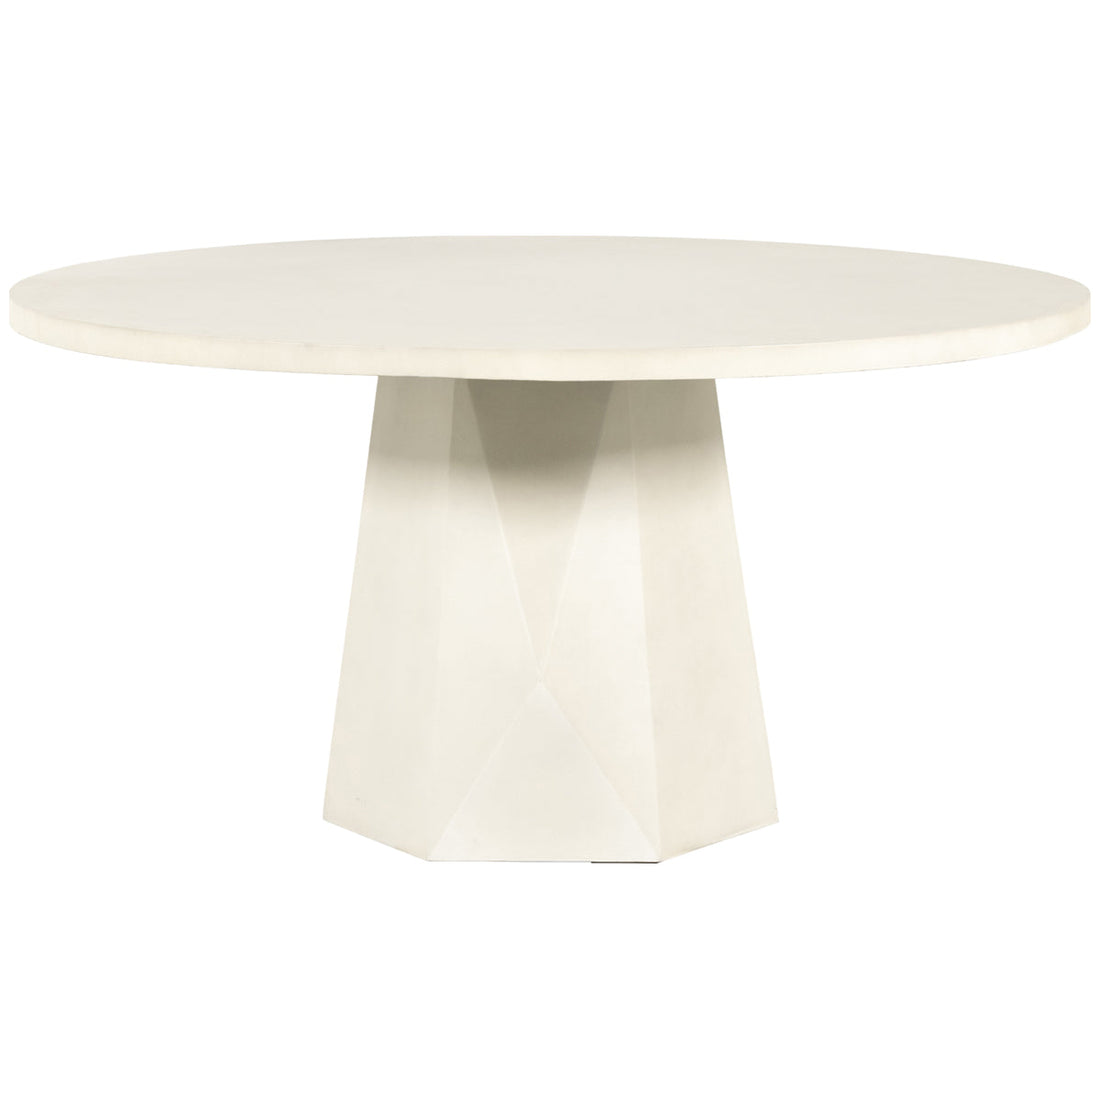 Four Hands Thayer Bowman Outdoor Dining Table